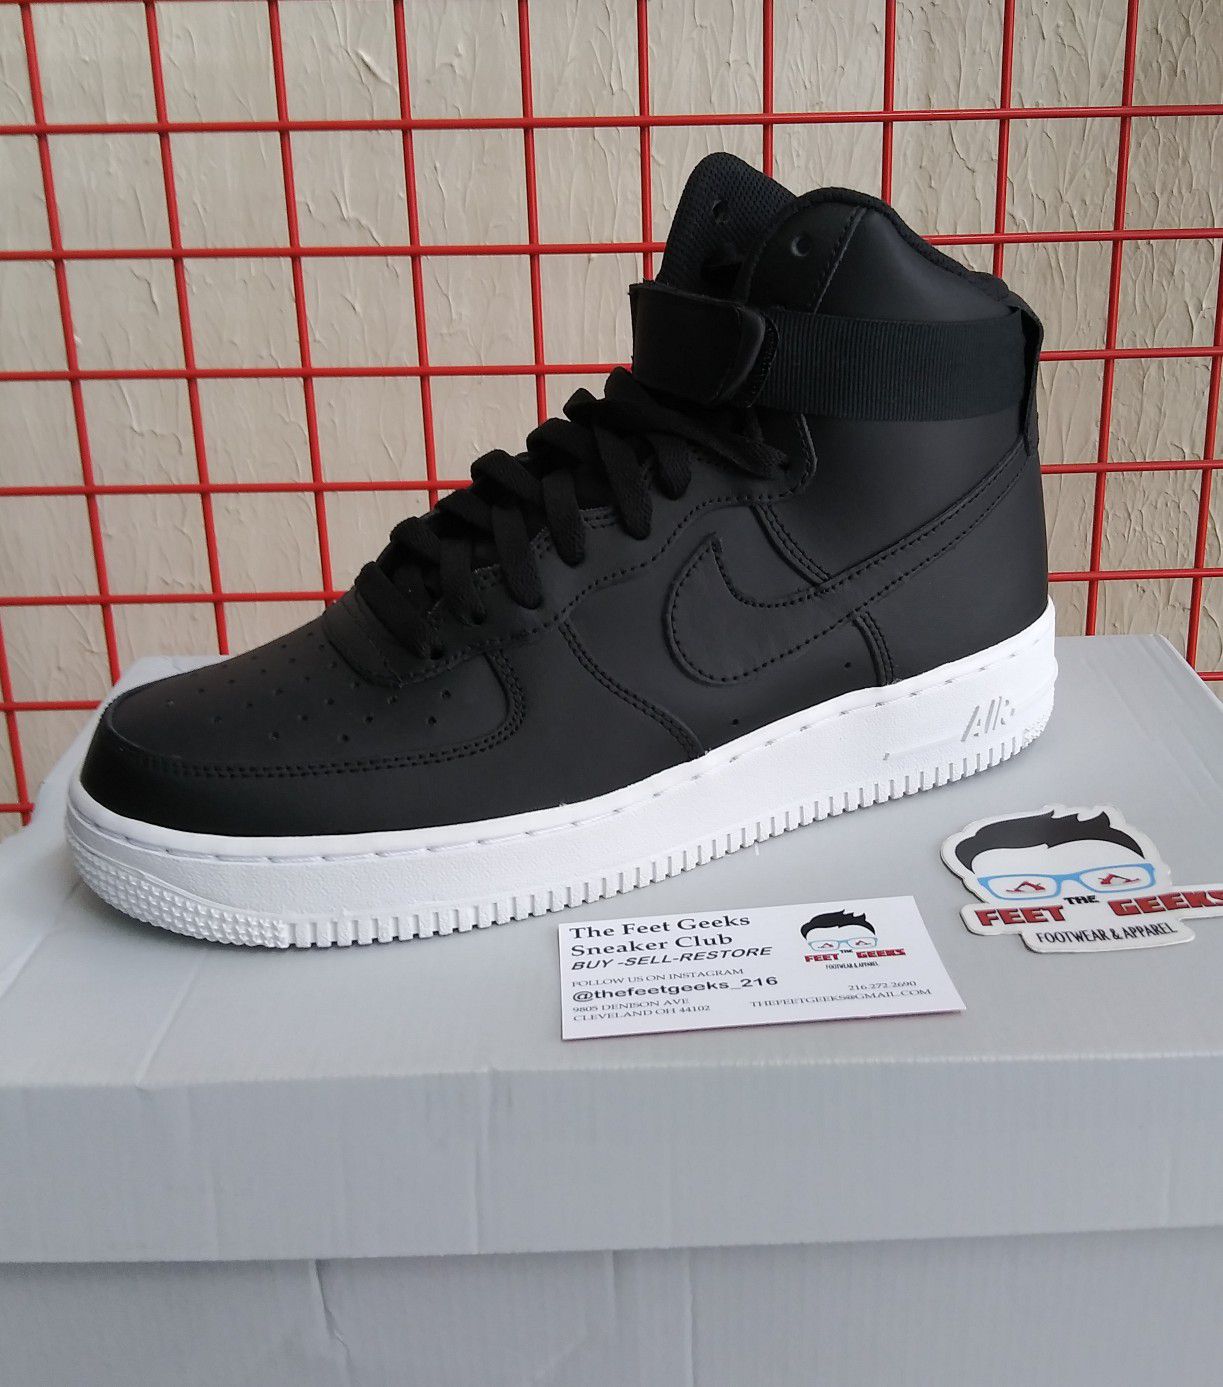 NIKE AIR FORCE 1 HIGH BLACK WHITE SIZE 8.5 US MEN SHOES NEW WITH BOX $135